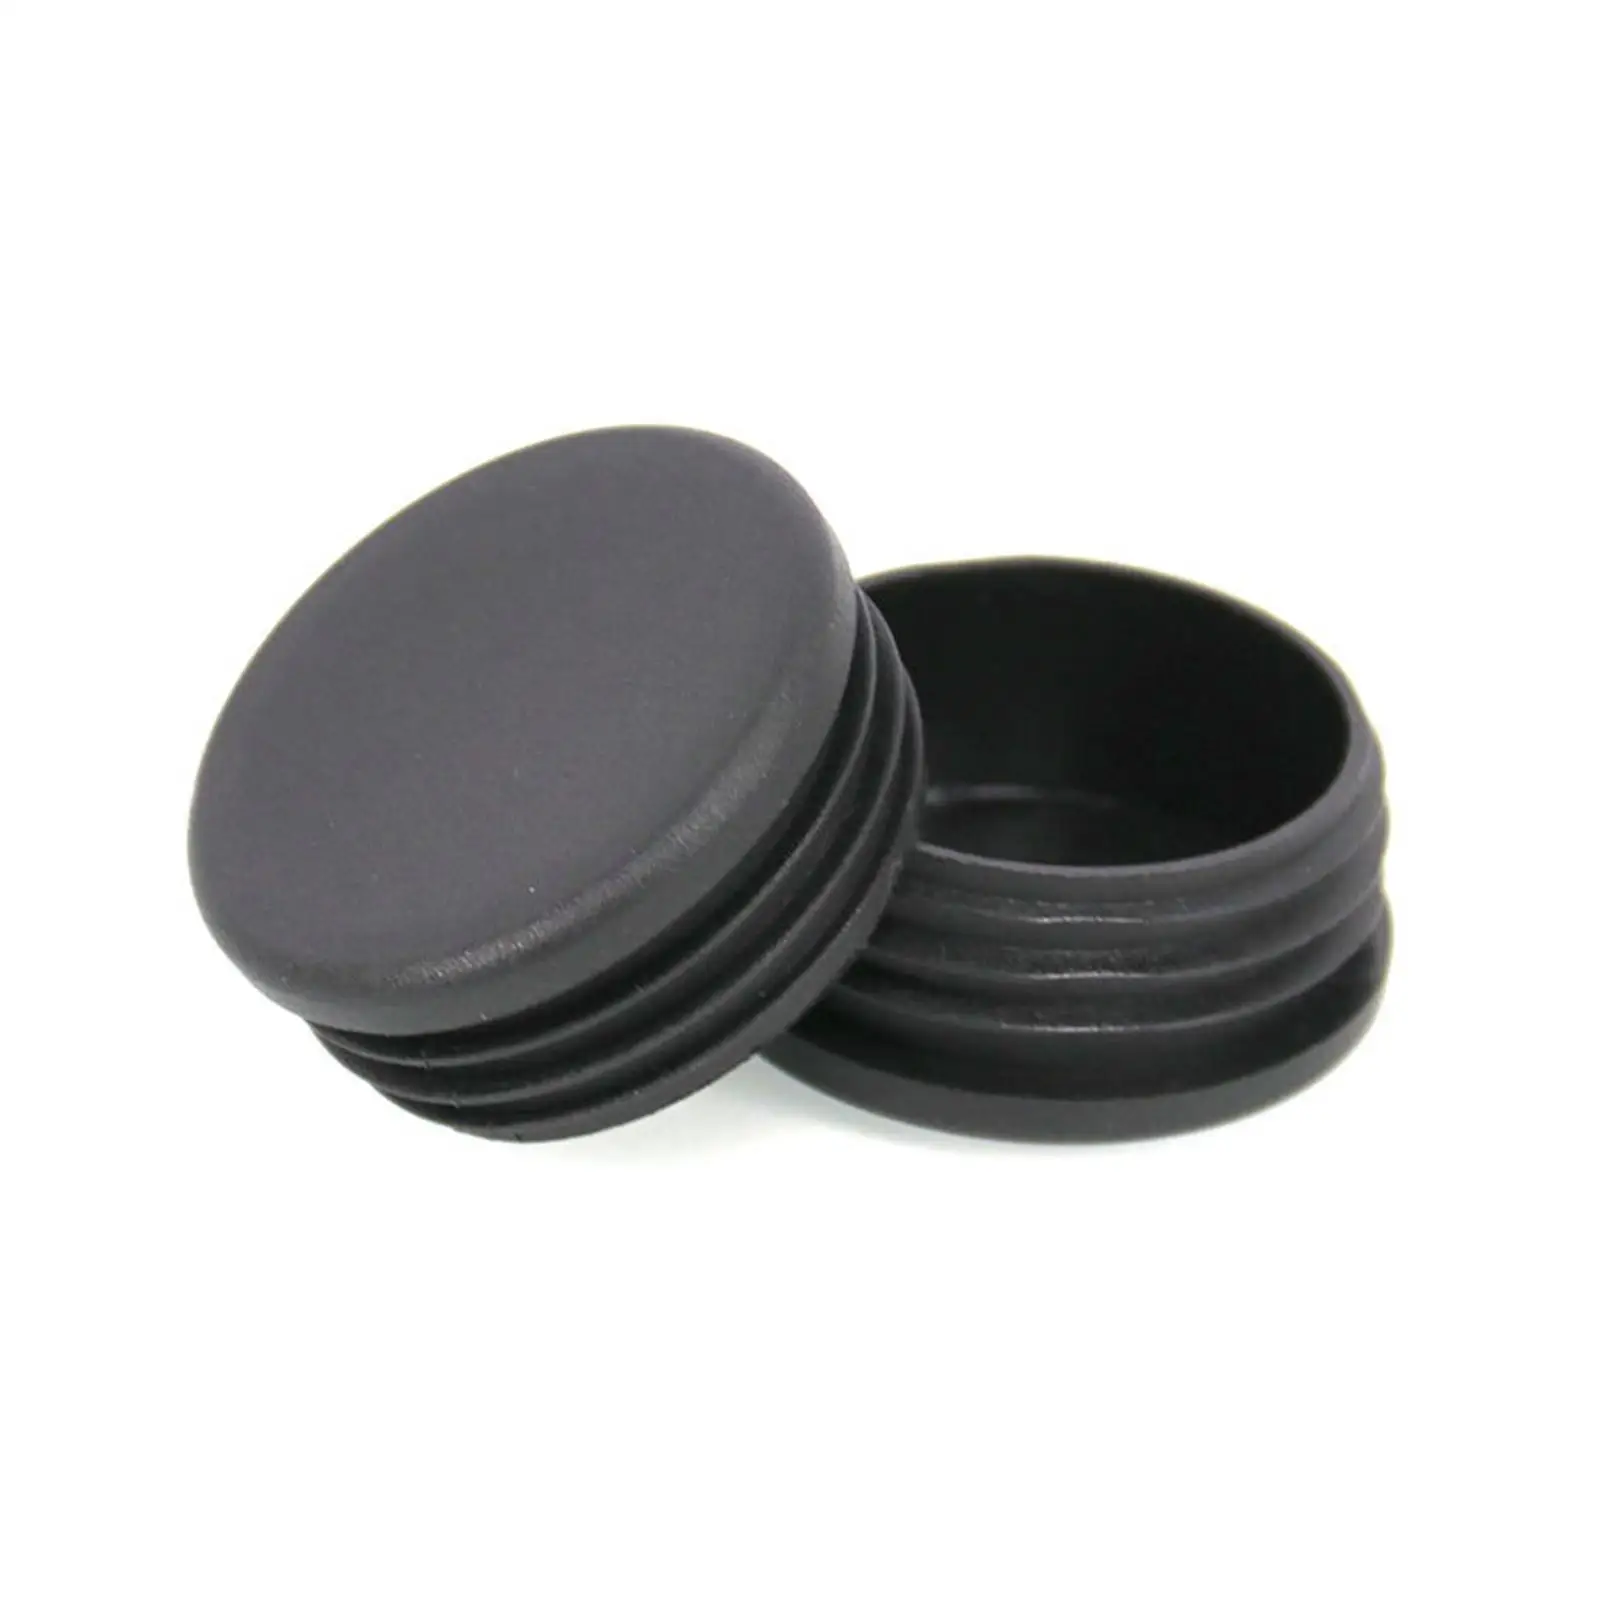 8 Pieces Waterproof Chassis Plug Covers ,Vehicle Parts ,Accessories Black Dustproof Plug Hole Covers for   Jb64 Jb74 20